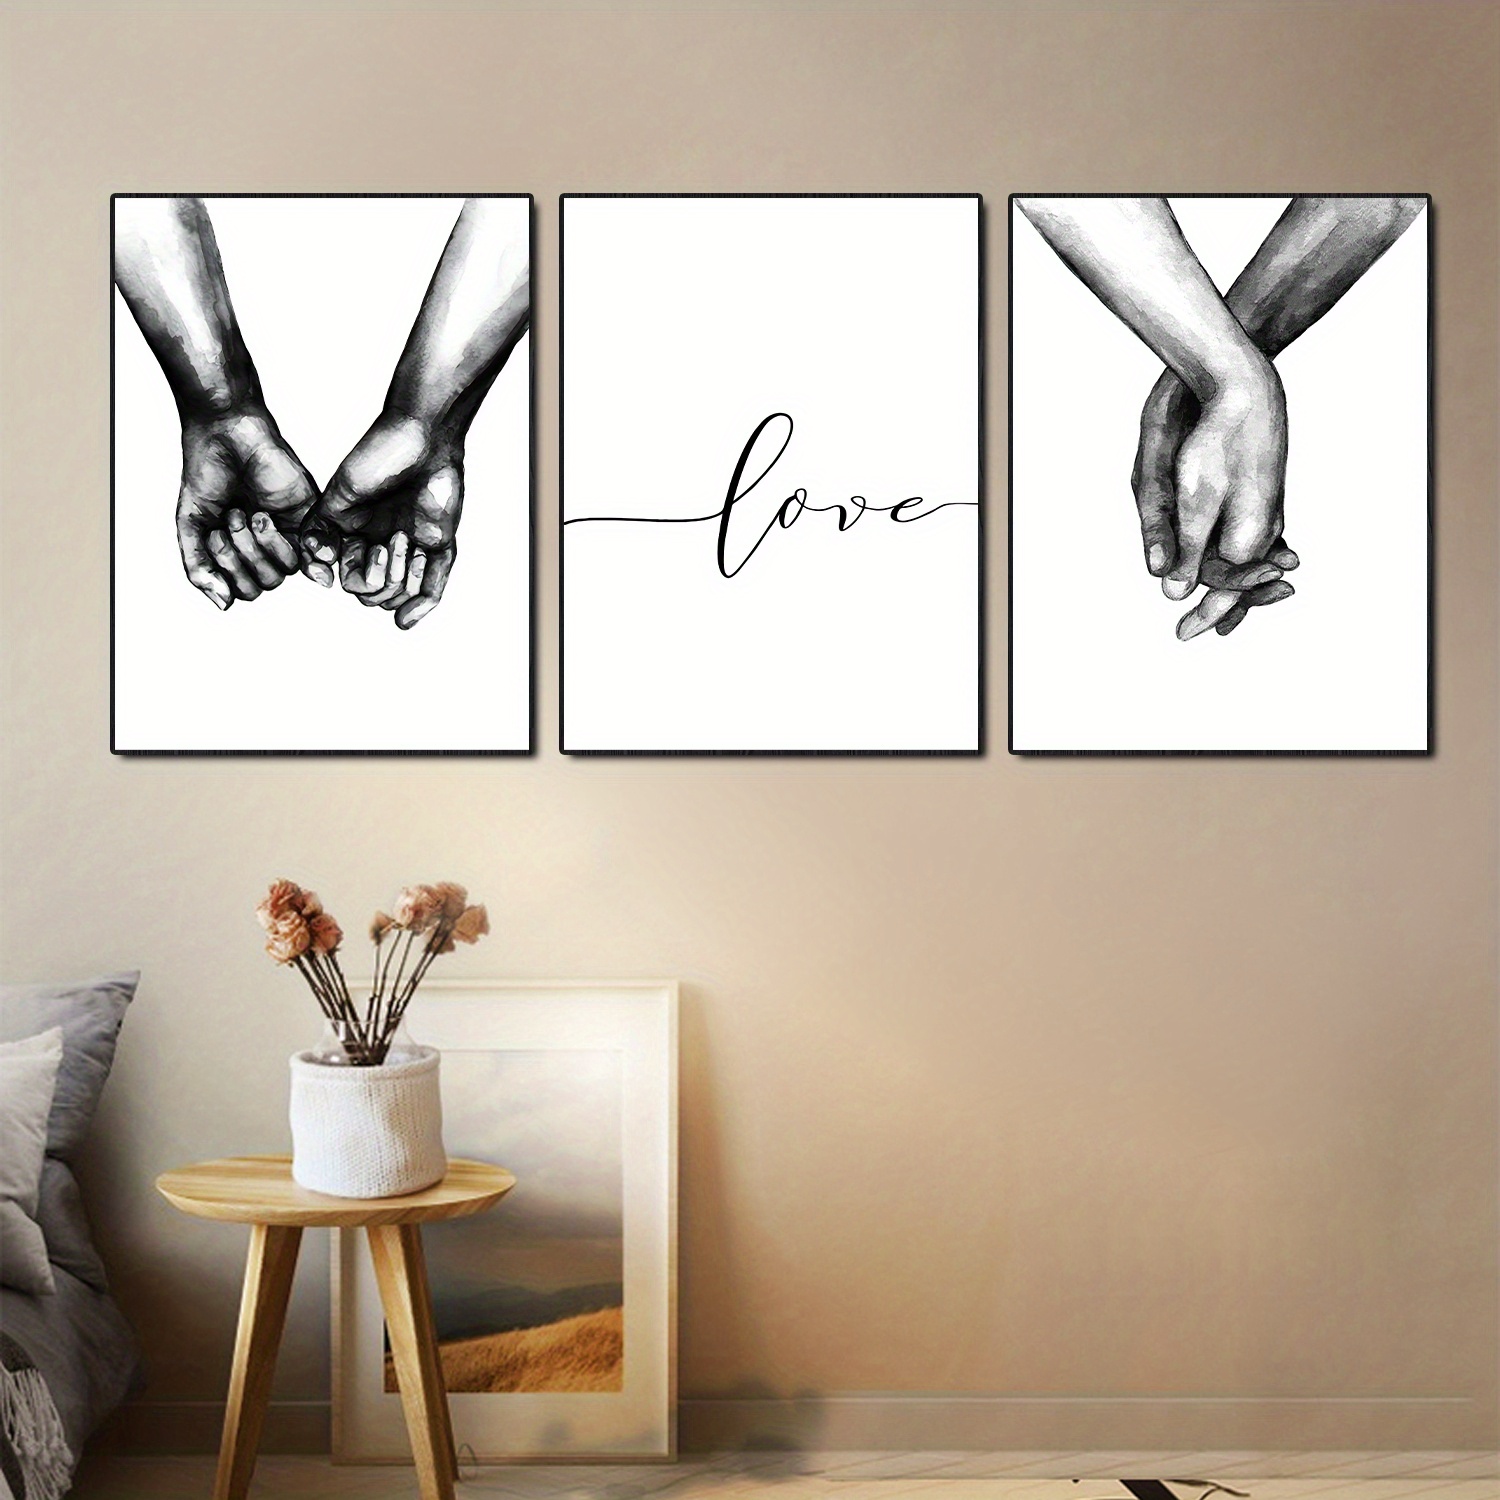 

3pcs/set Romantic Hand In Hand Wall Art Poster, Black And White Love Quotes Gift For Couples And Lovers Canvas Painting Posters, For Living Room Bedroom Bathroom Office Kitchen Wall Decors, Unframed